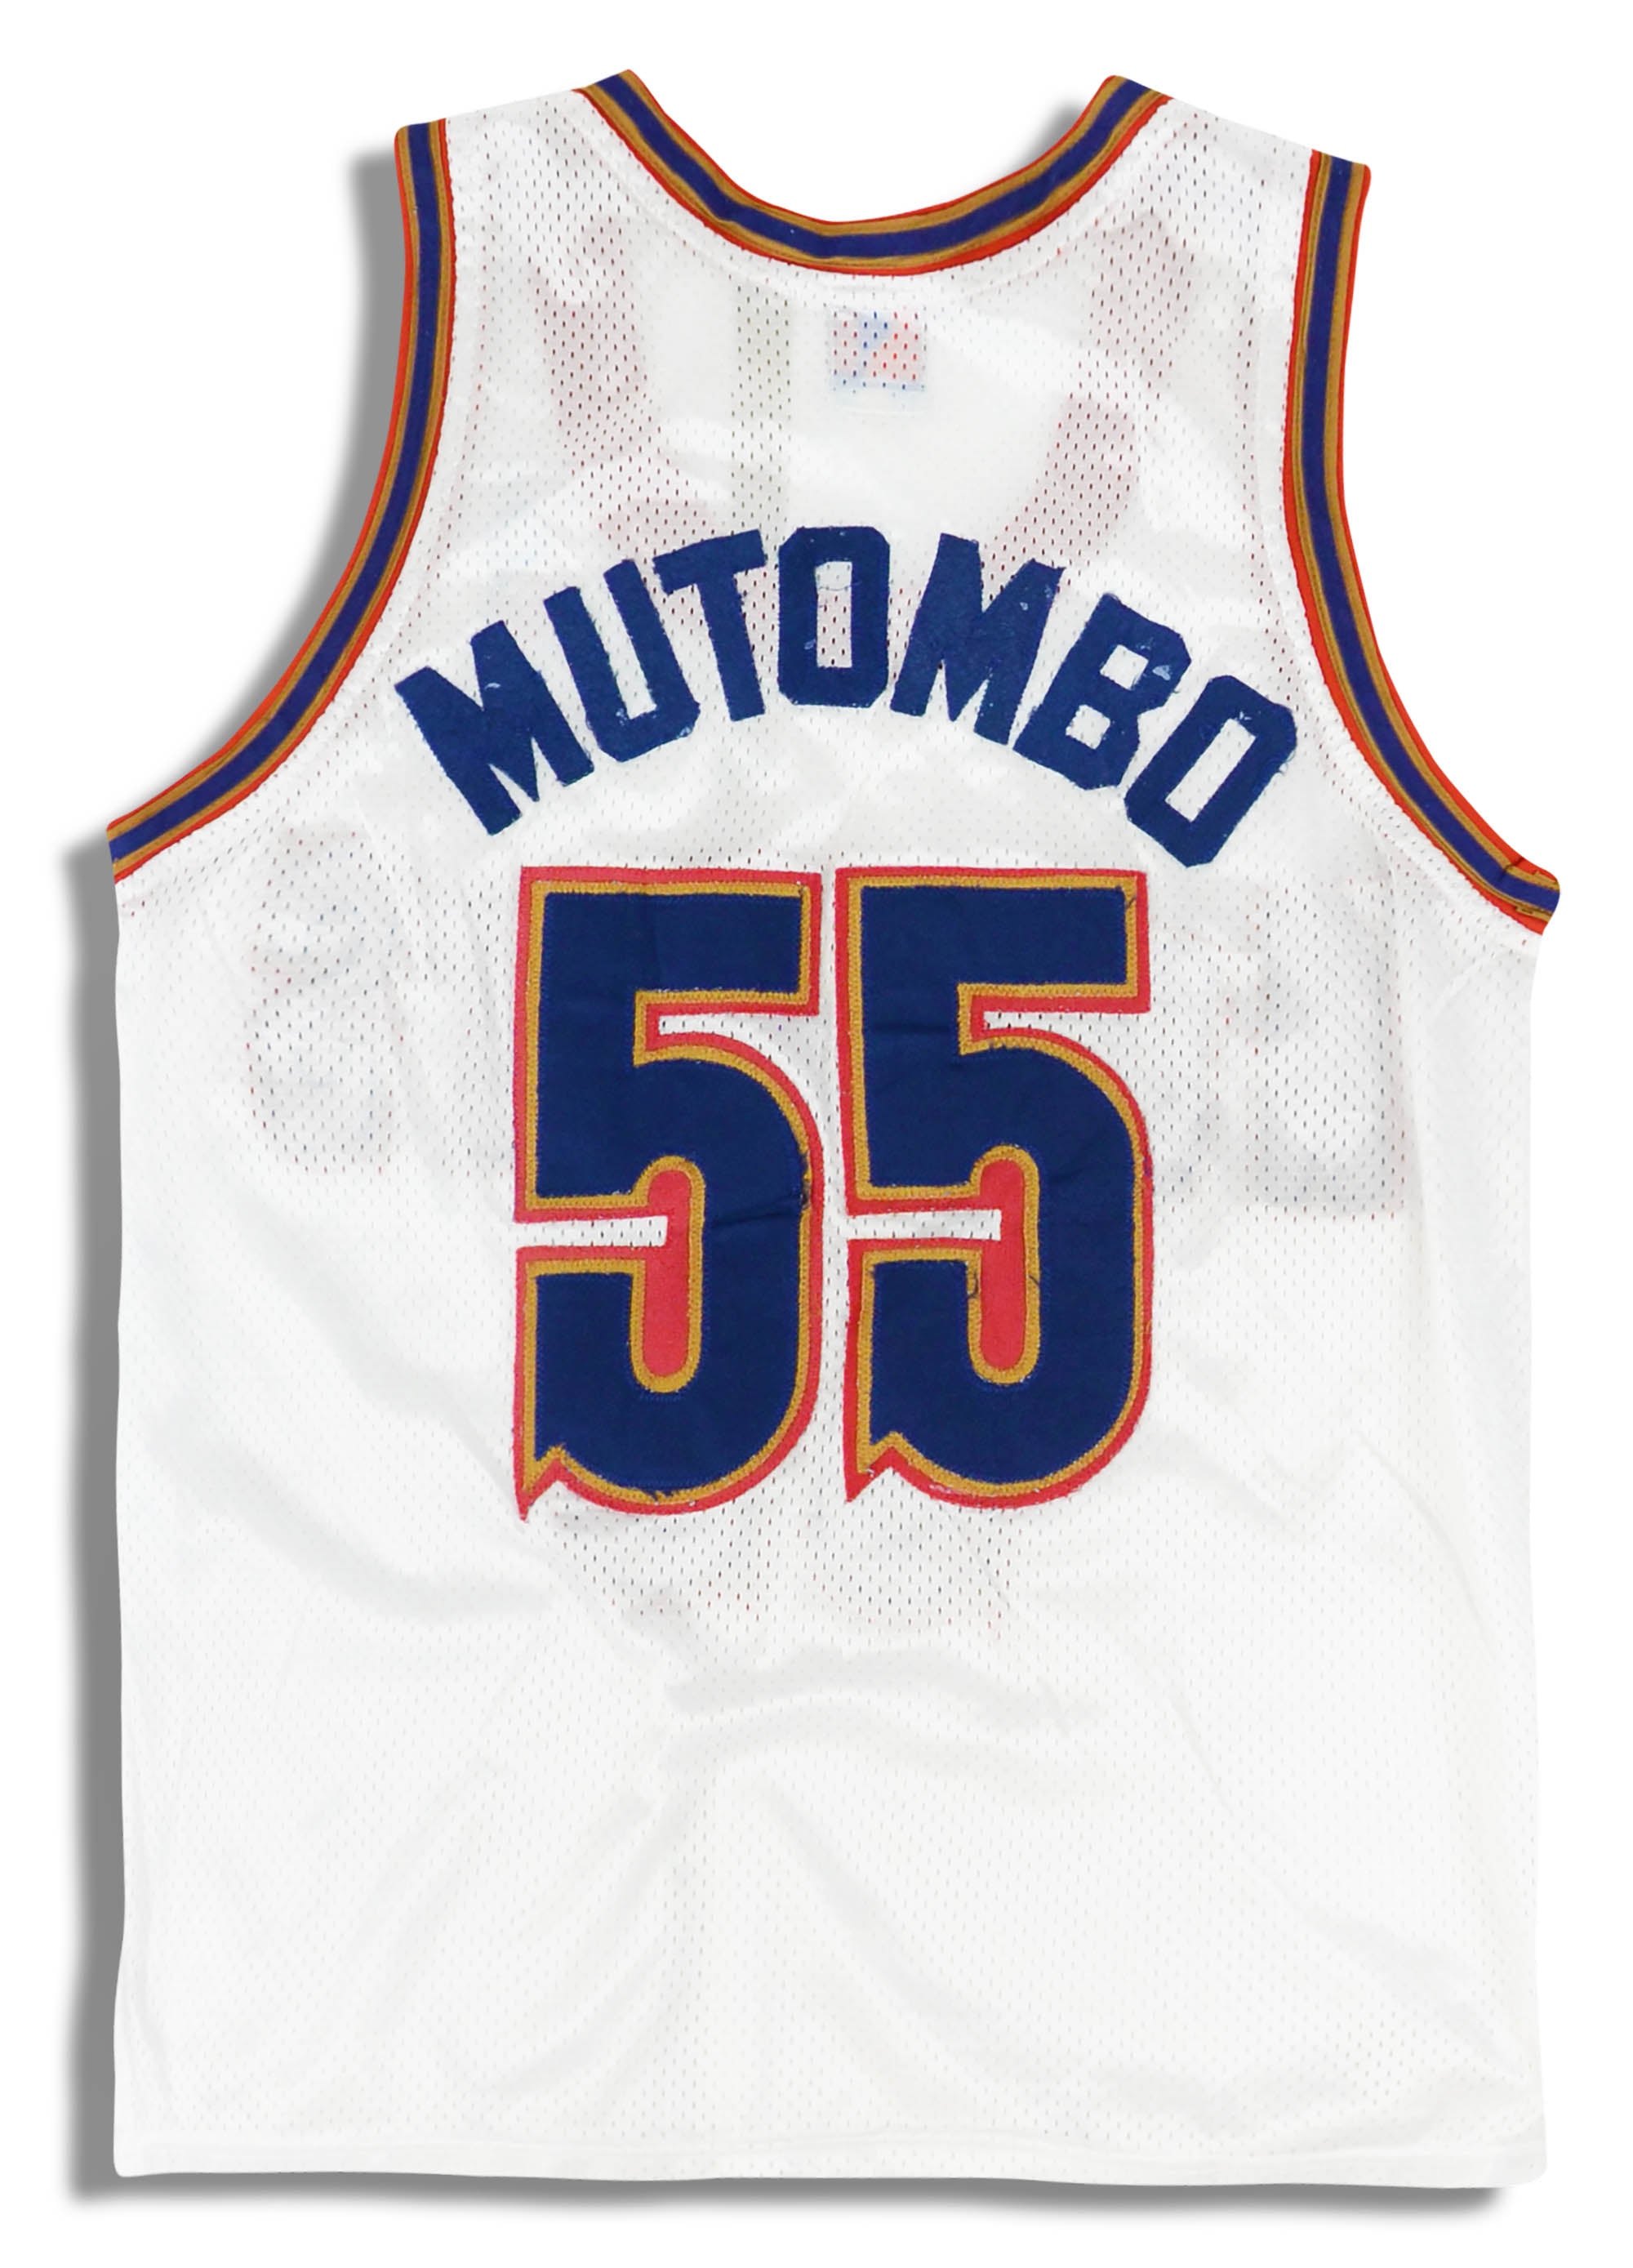 Sports / College Deadstock Vintage Champion NBA Nuggets 55 Mutombo 90s Size XX-Large Made in USA